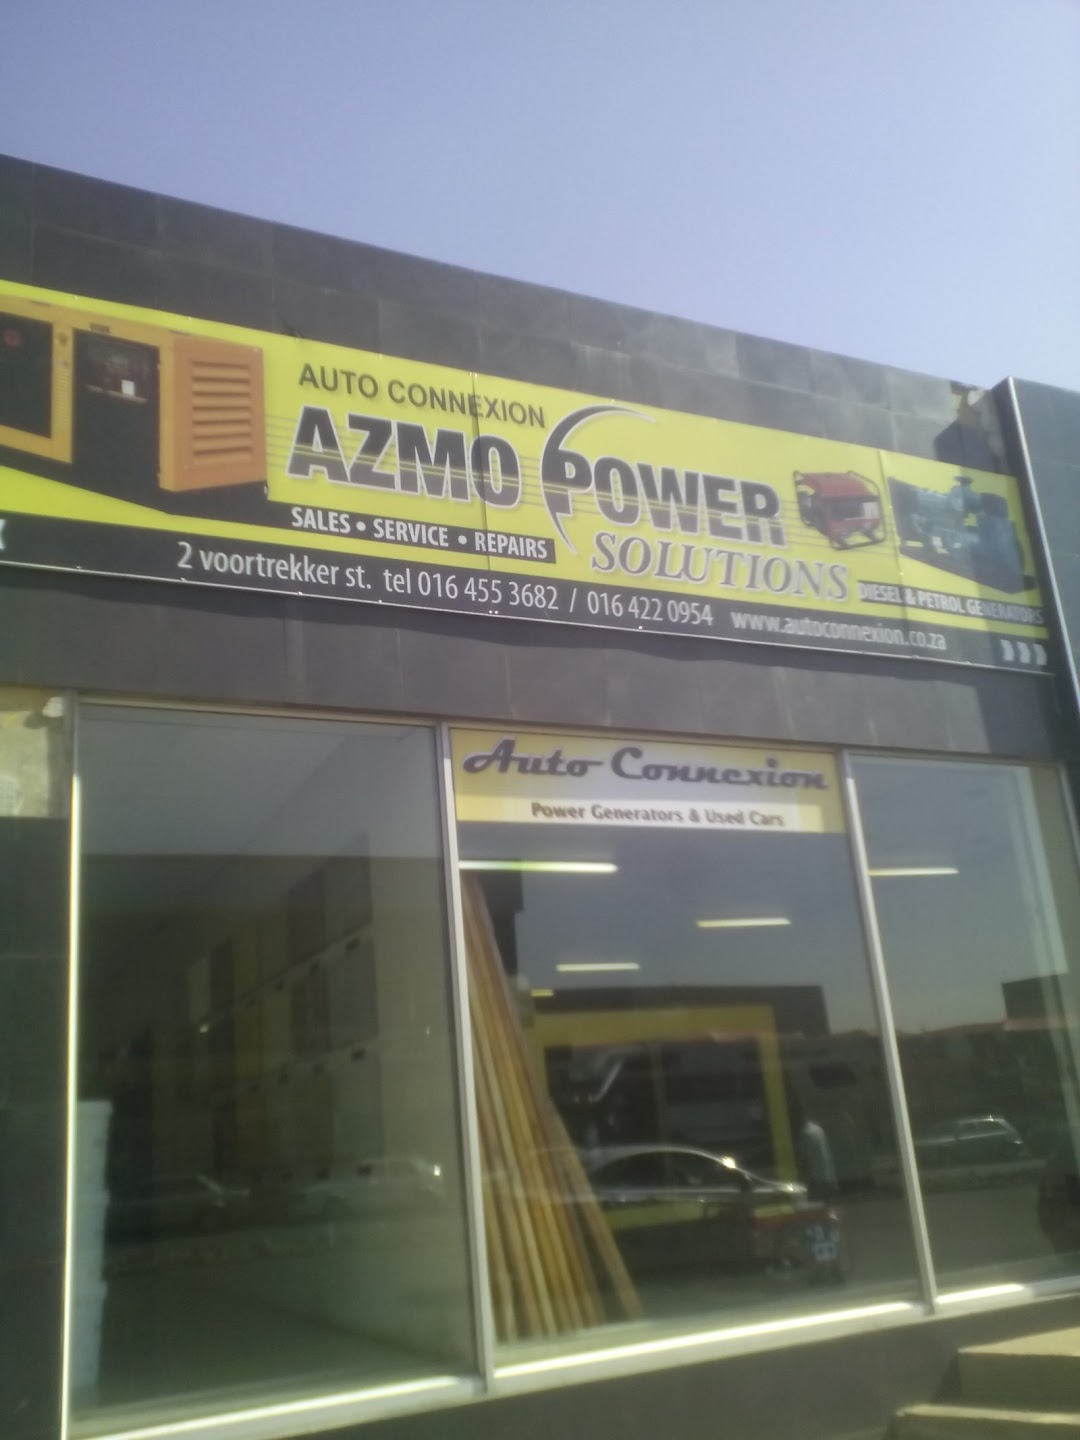 Auto Connection cc ta Azmo Power Solutions